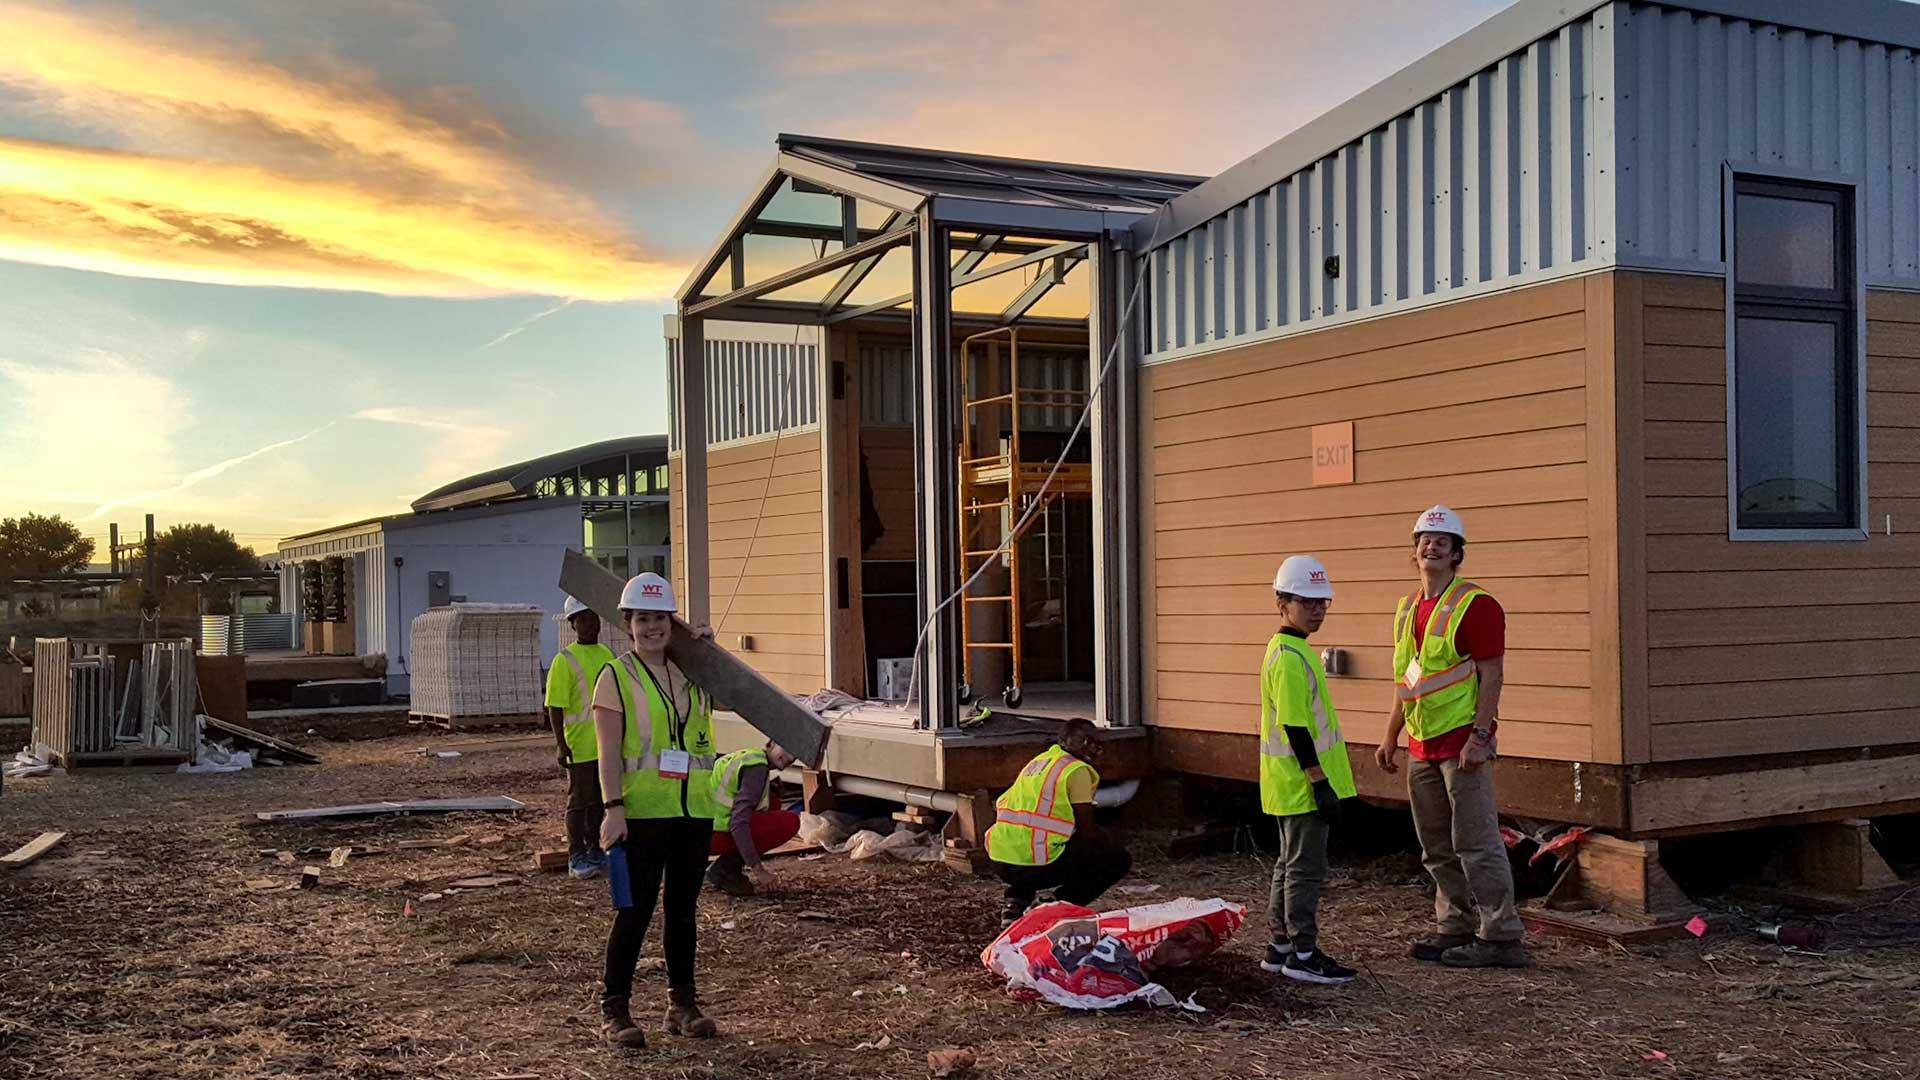  Maryland team members assemble the reACT house in Denver for the 2017 Solar Decathlon, in which UMD took second place overall, and fielded the top-ranked U.S. entry. Faculty, staff and at least one student who worked on reACT are part of a new Department of Energy-sponsored solar competition in 2021. (Photo by WP Andros)